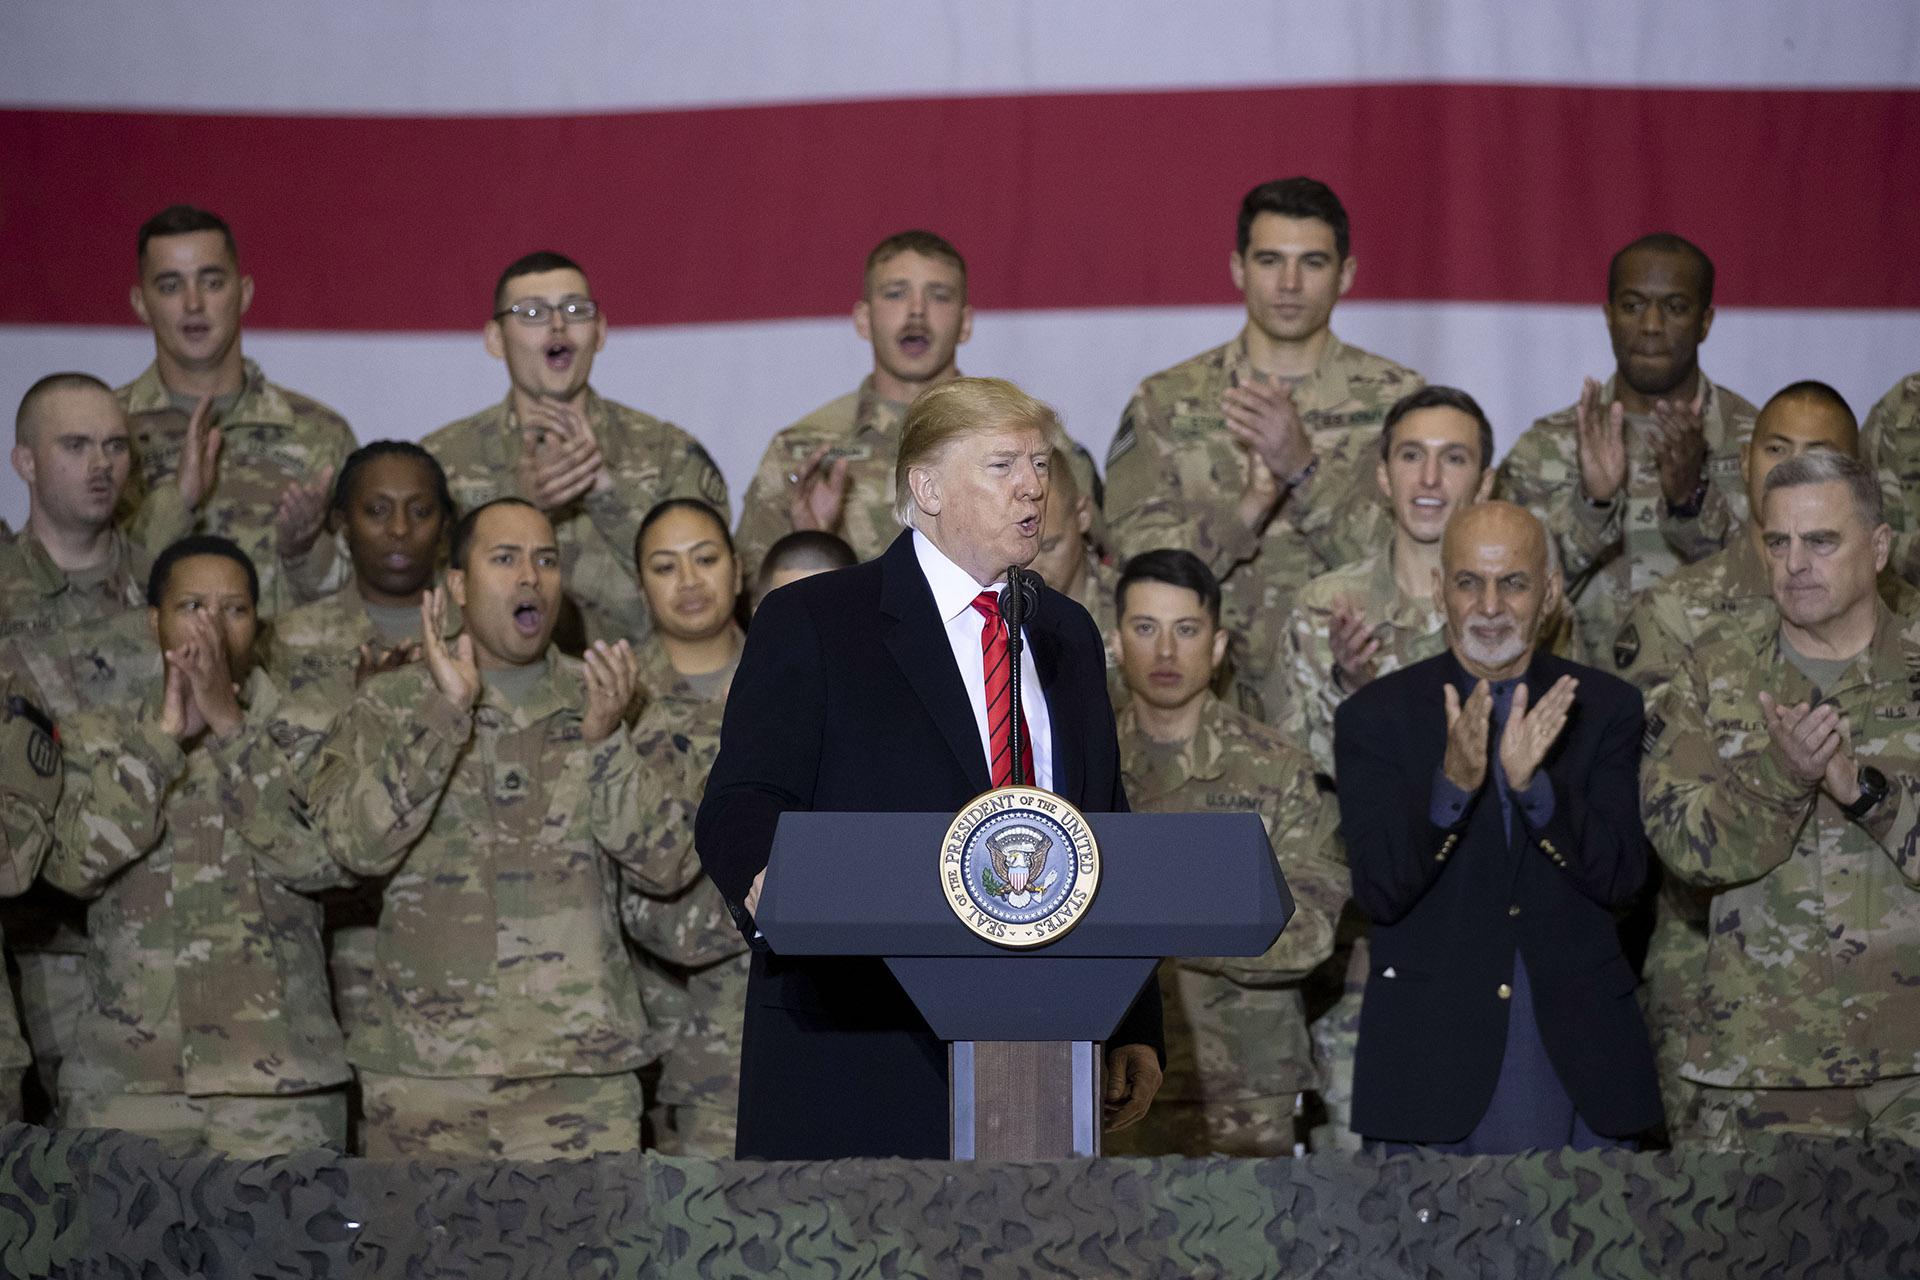 President Donald Trump, center, with Afghan President Ashraf Ghani, second from the right, and Joint Chiefs Chairman Gen. Mark Milley, right, while addressing members of the military during a surprise Thanksgiving Day visit, Thursday, Nov. 28, 2019, at Bagram Air Field, Afghanistan. (AP Photo / Alex Brandon)